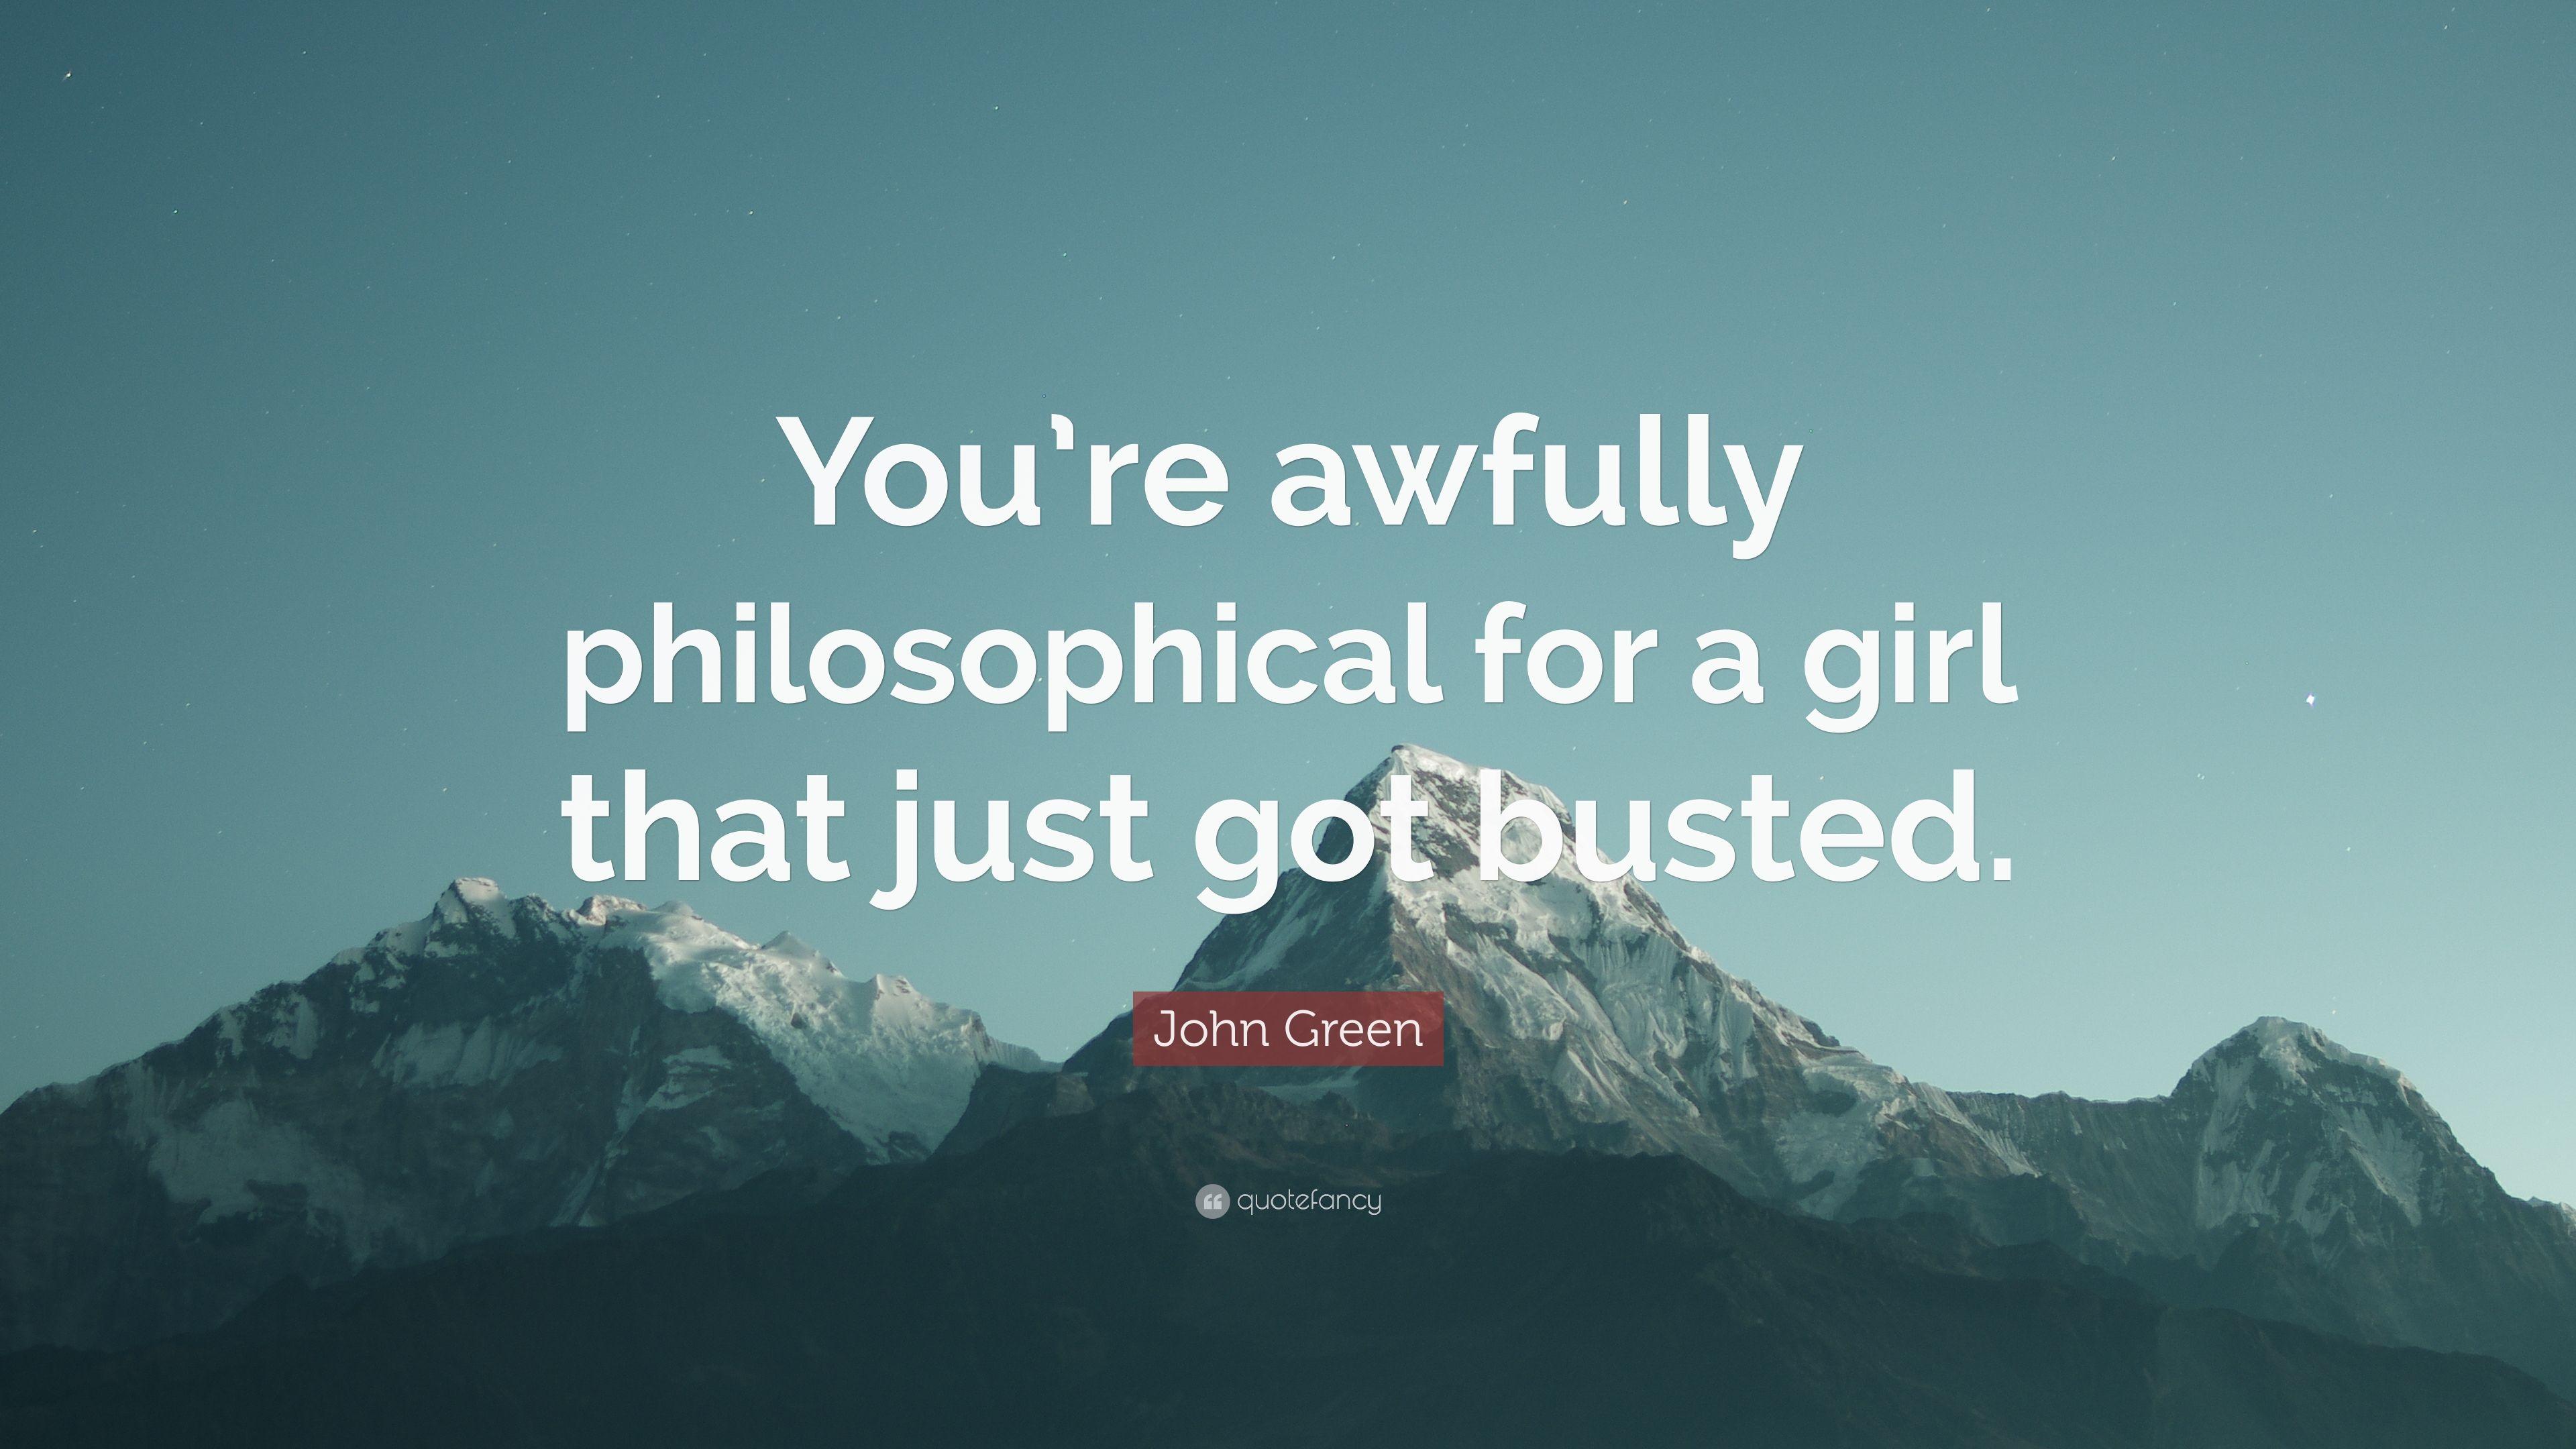 John Green Quote: “You're awfully philosophical for a girl